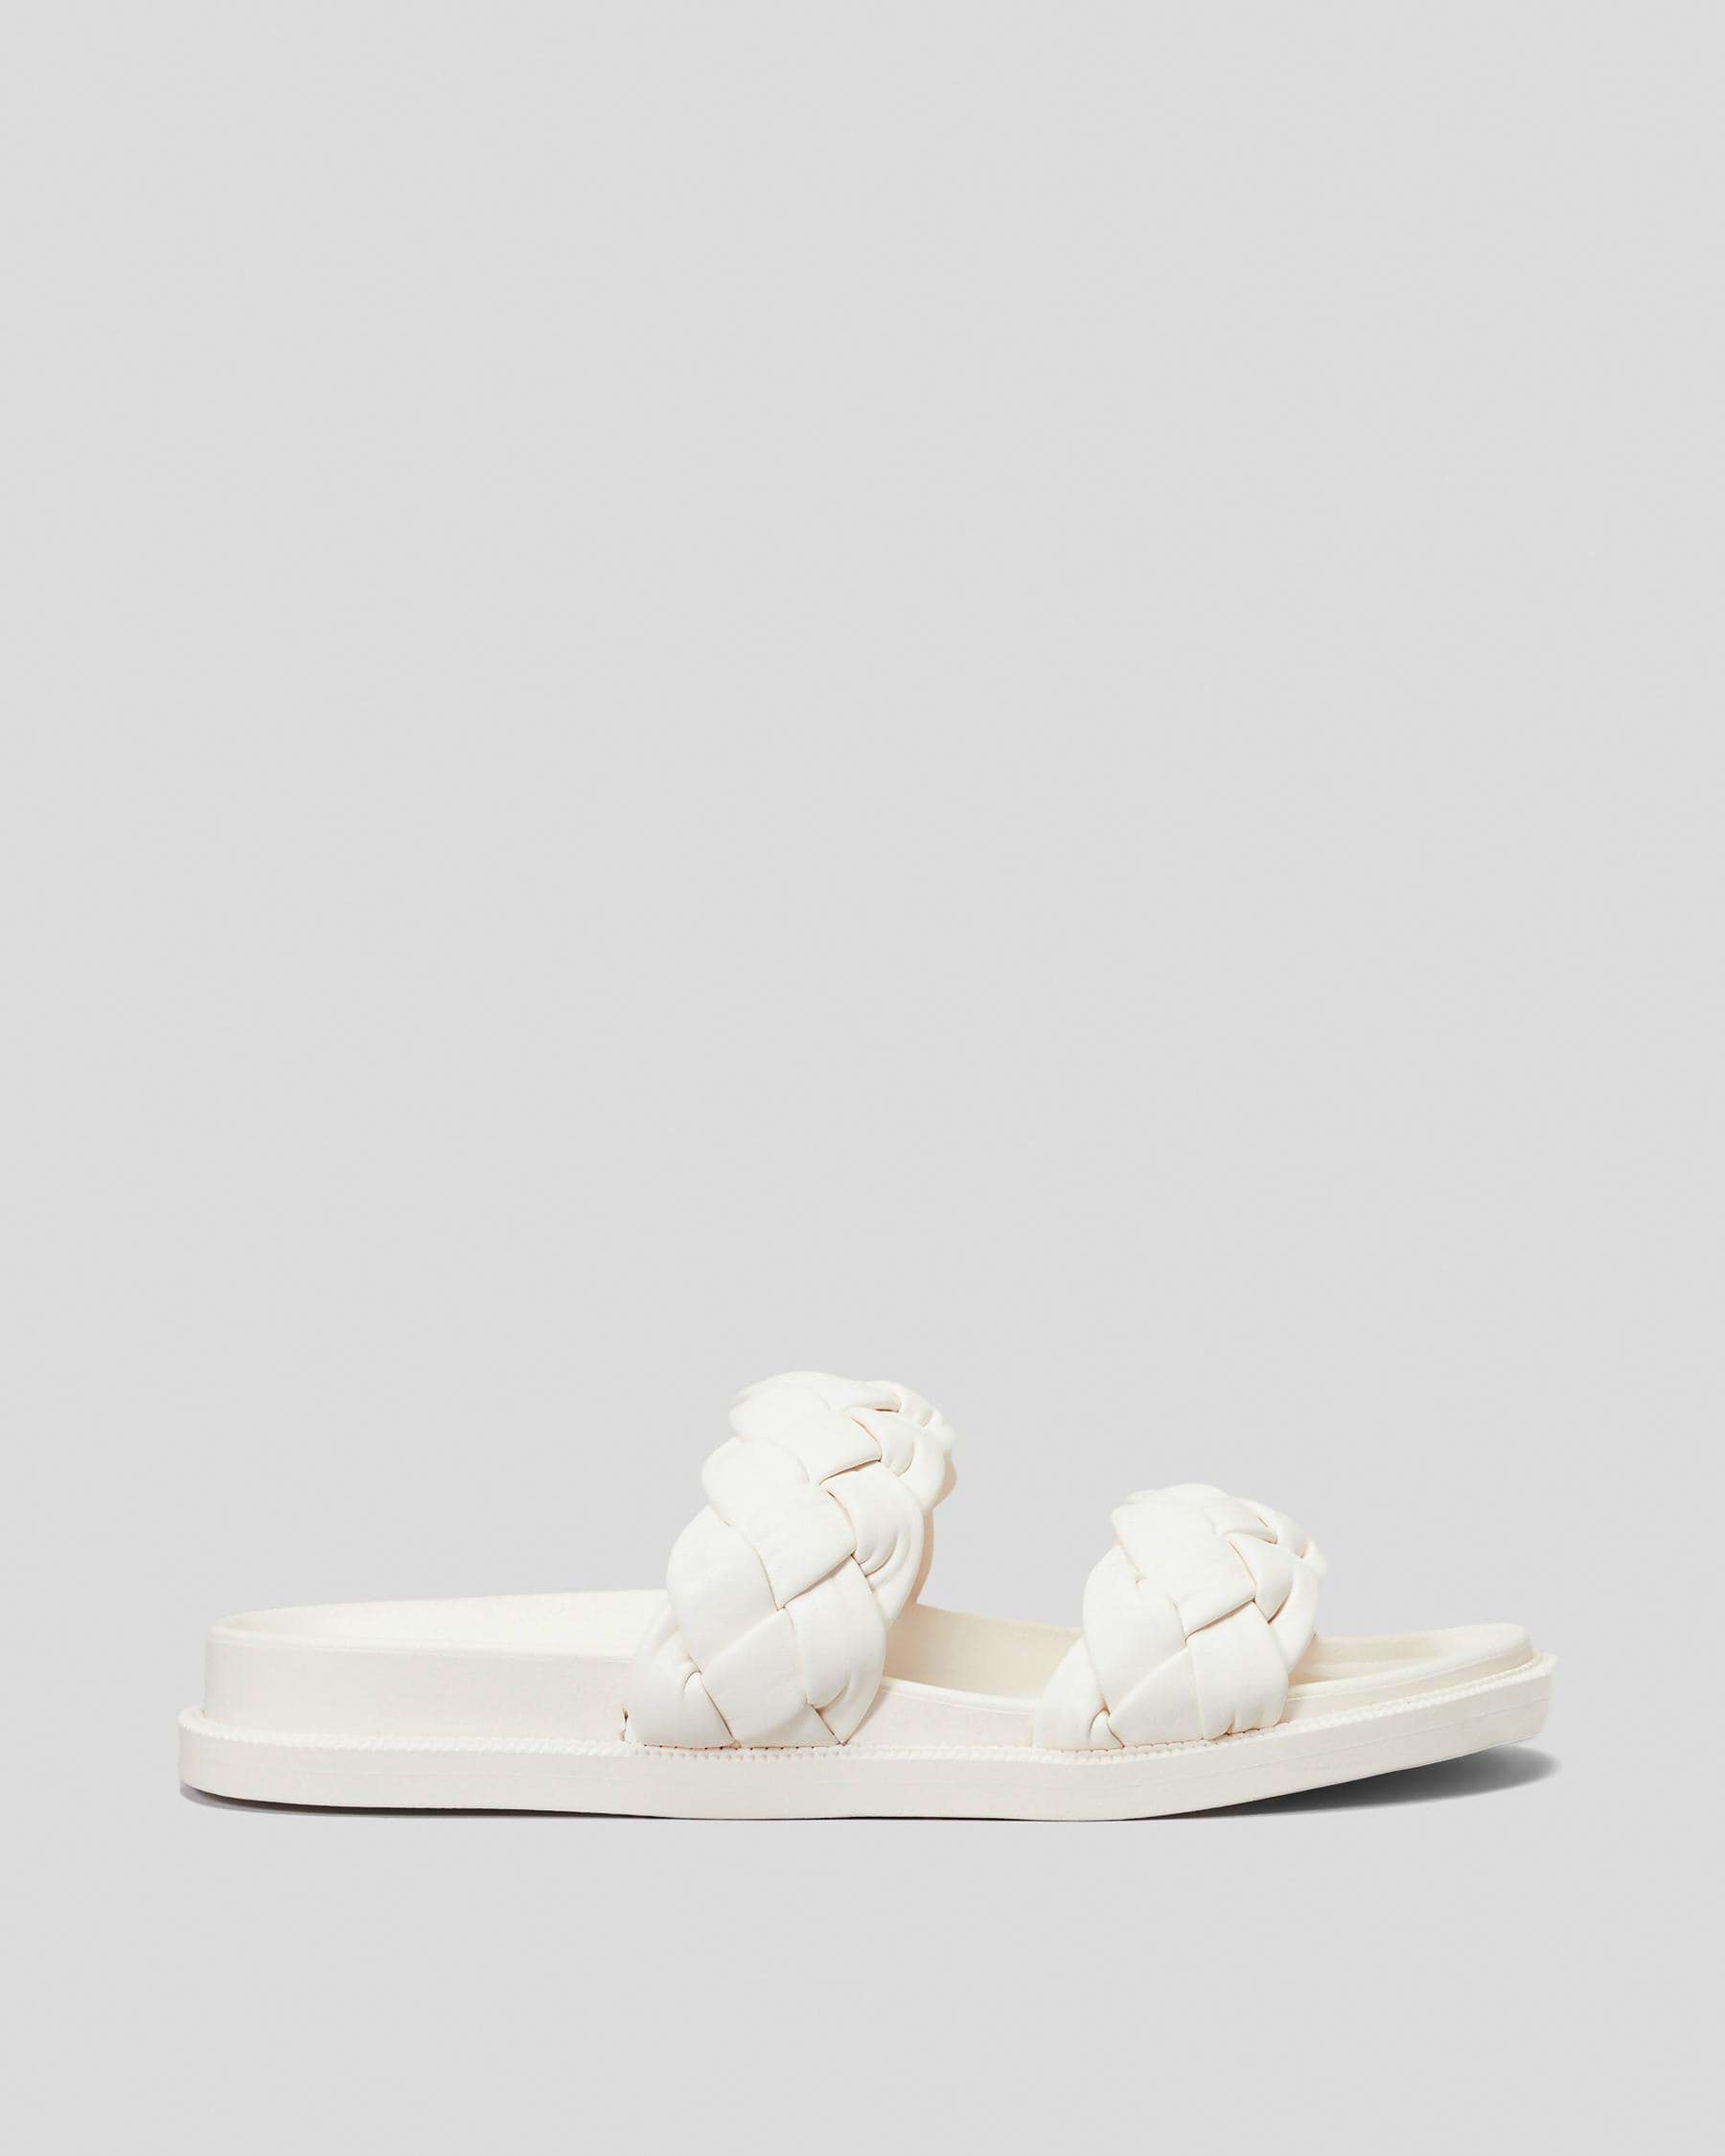 Shop Ava And Ever Eve Slide Sandals In Cream - Fast Shipping & Easy ...